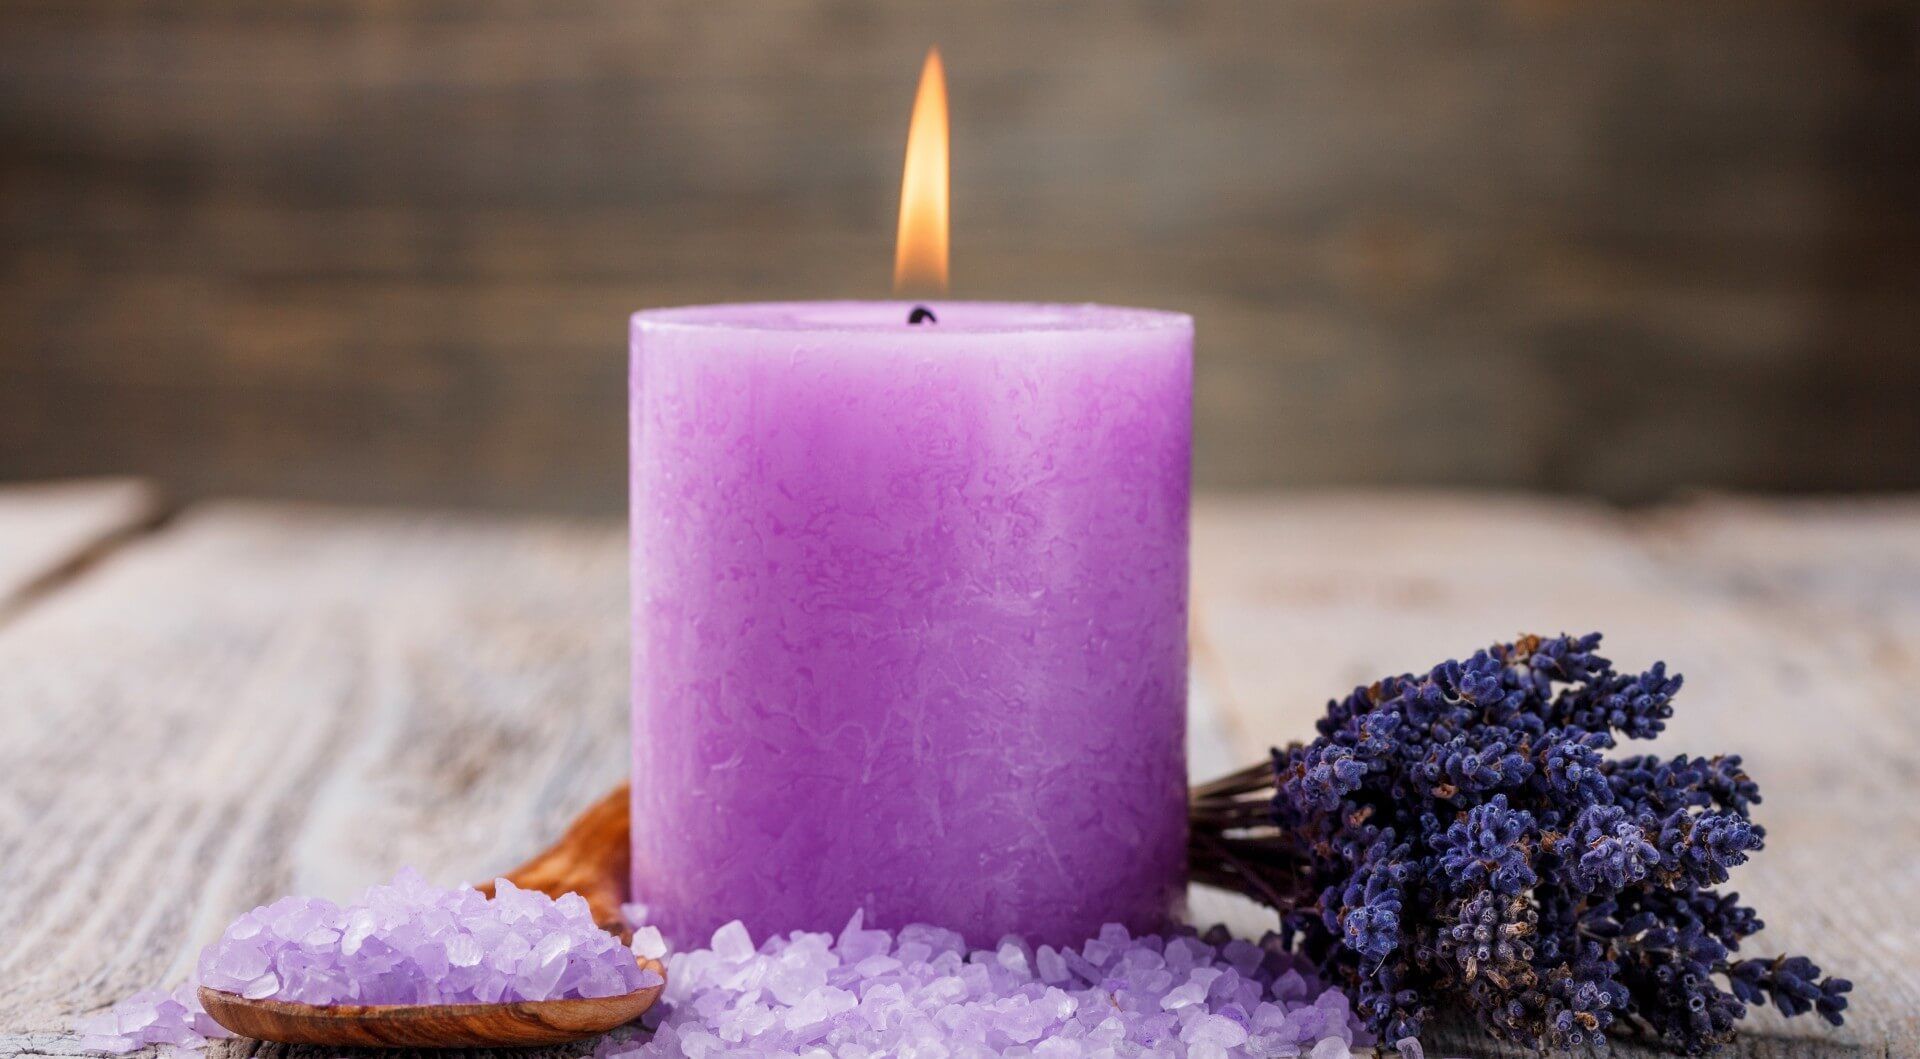 Purple lavender-scented candle to drive away bugs and pests with lavender scent